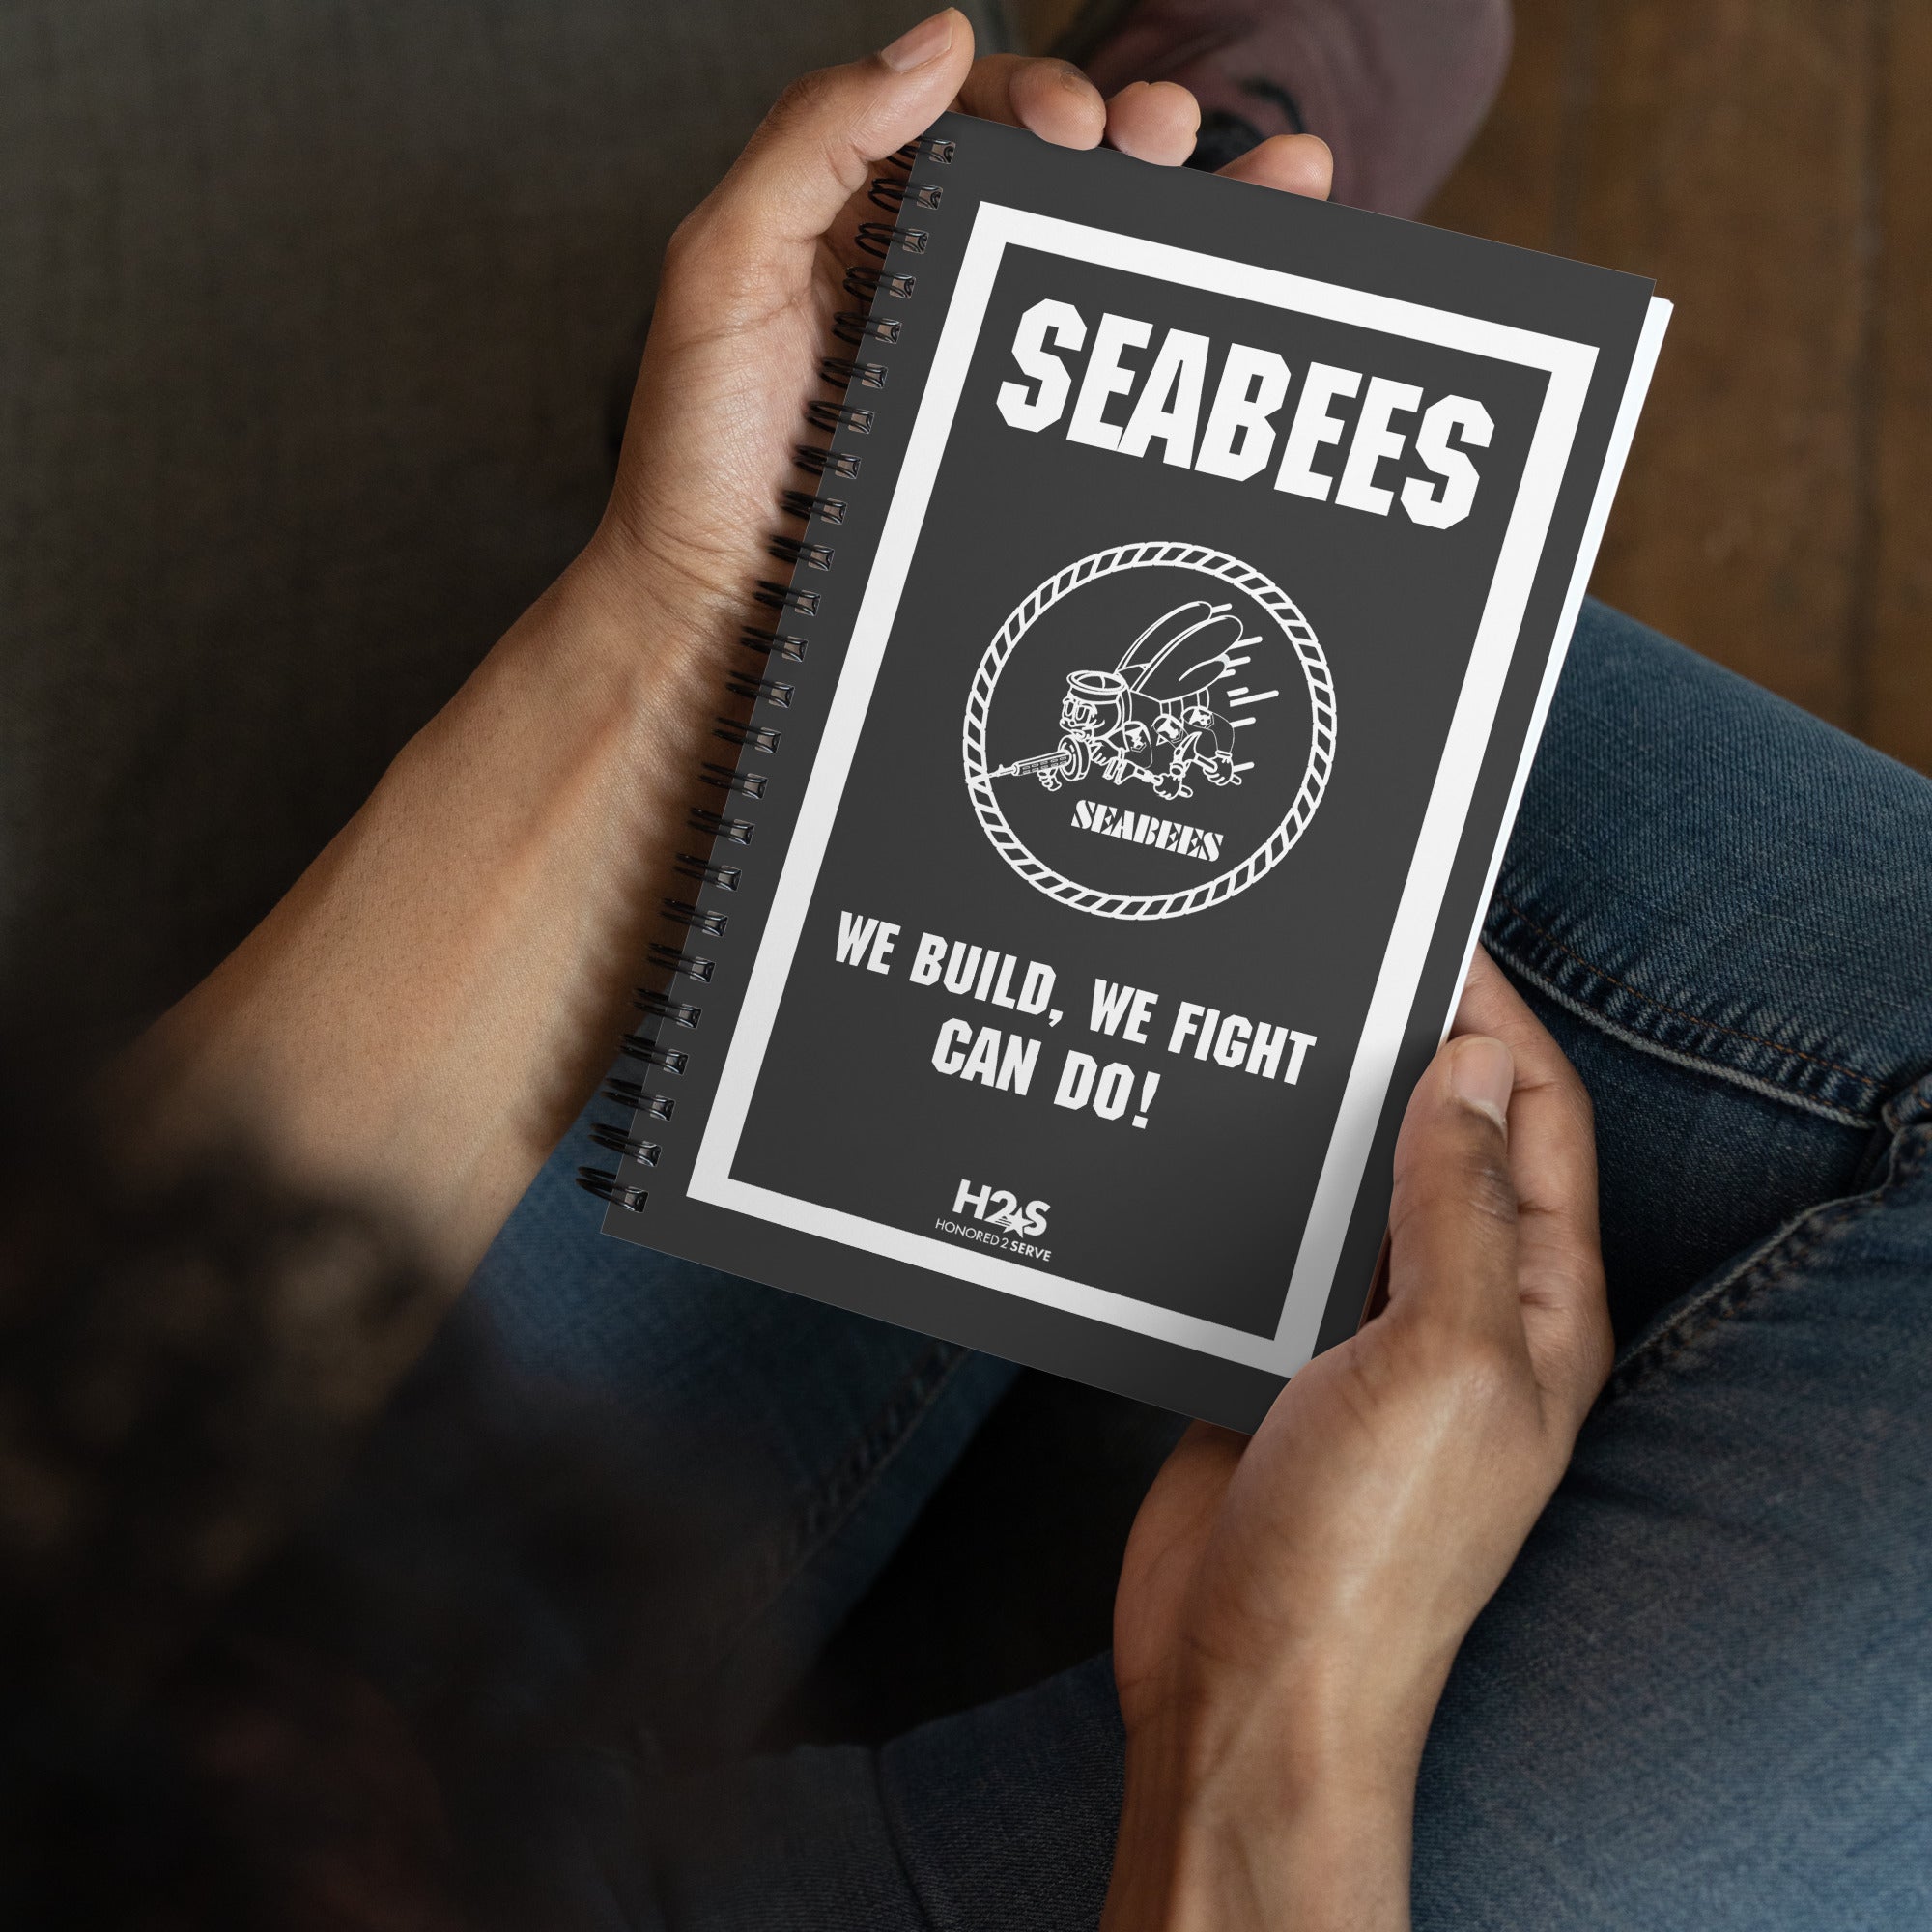 US SEABEES Spiral notebook